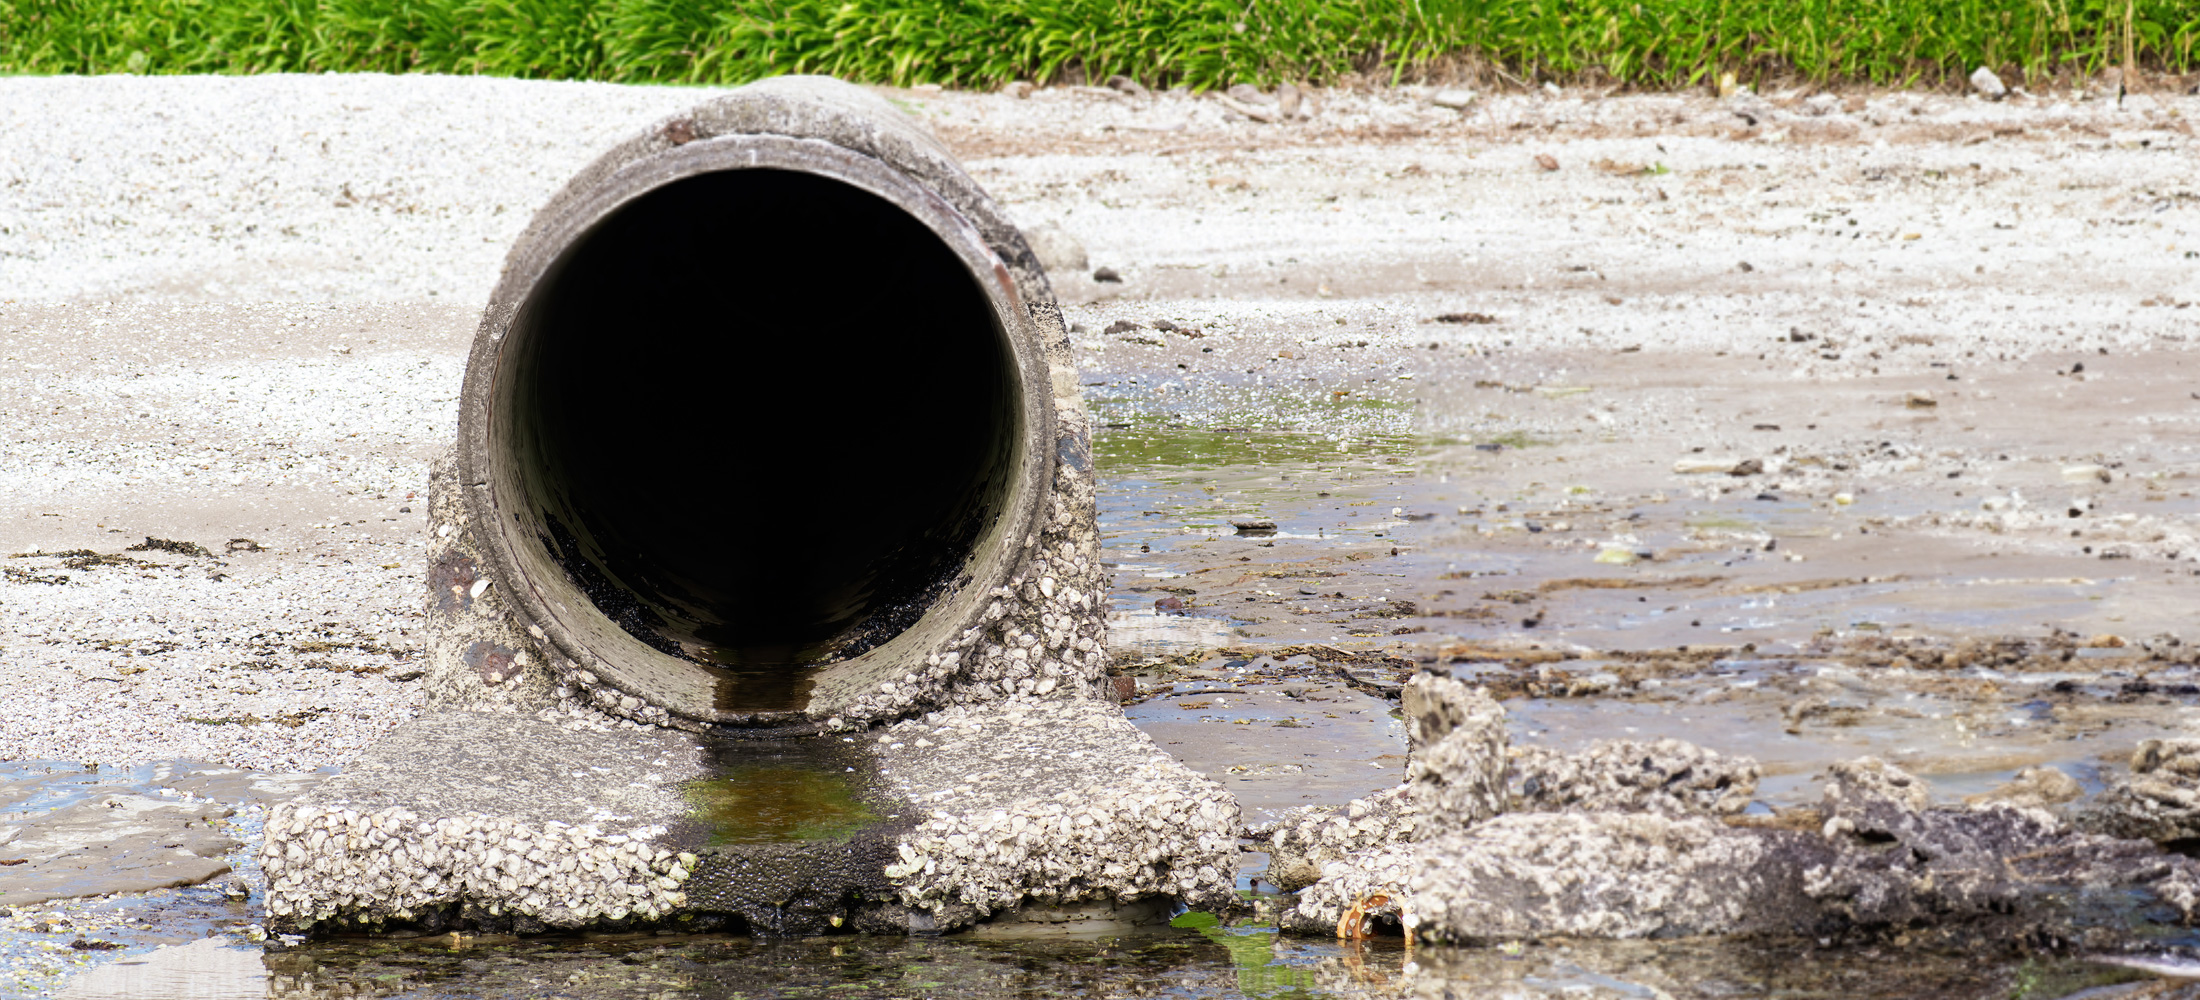 Image of a storm water drain